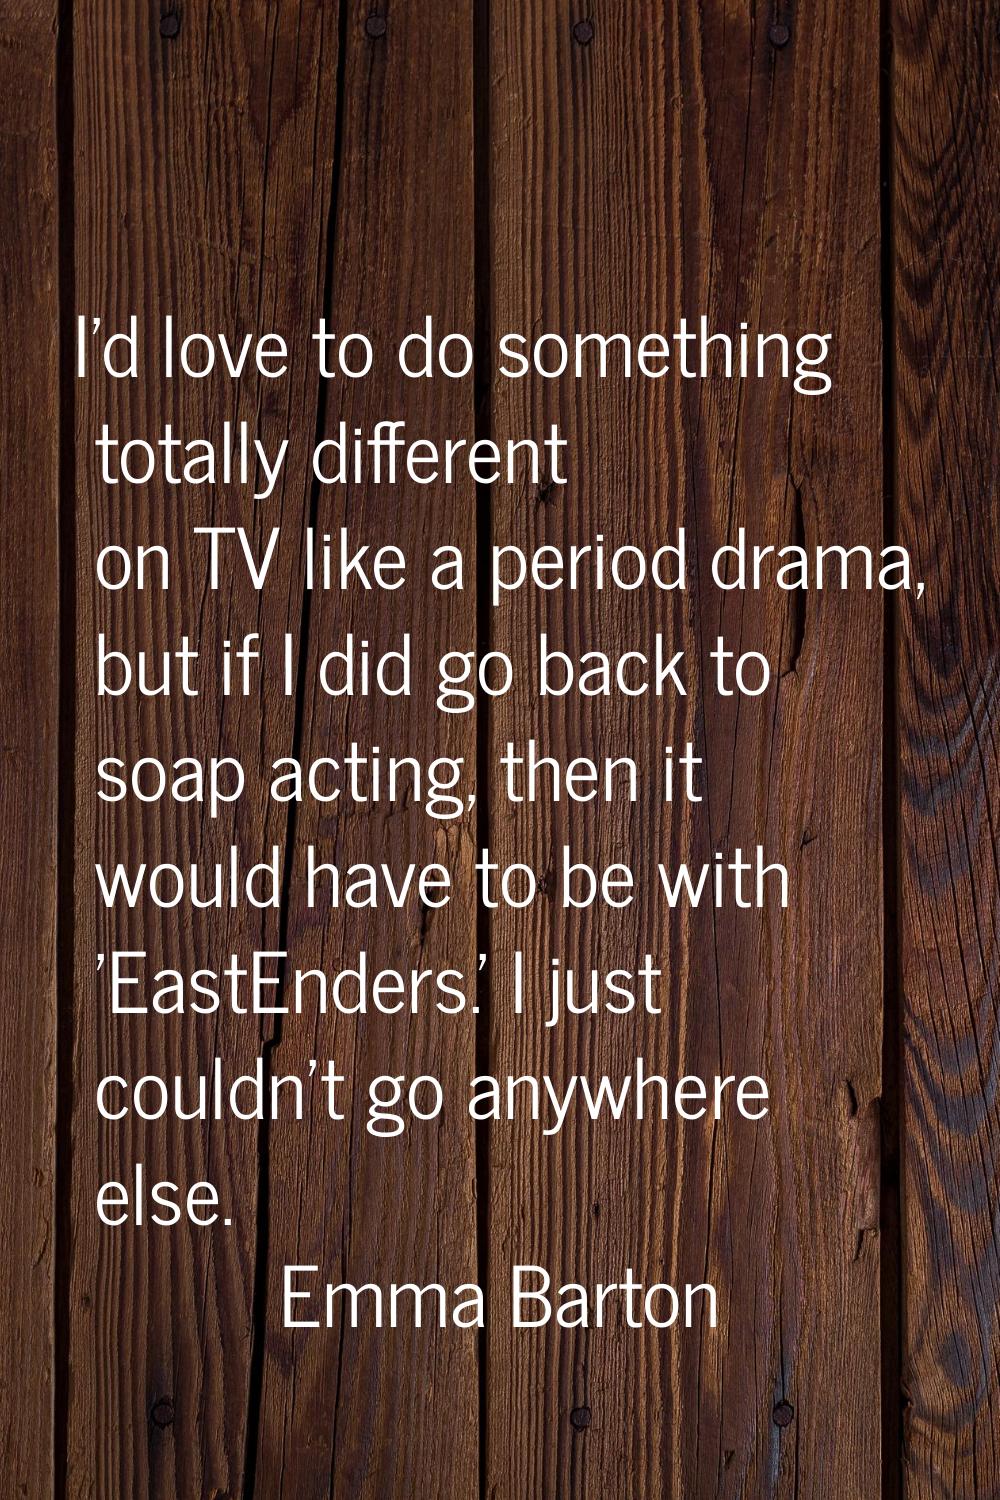 I'd love to do something totally different on TV like a period drama, but if I did go back to soap 